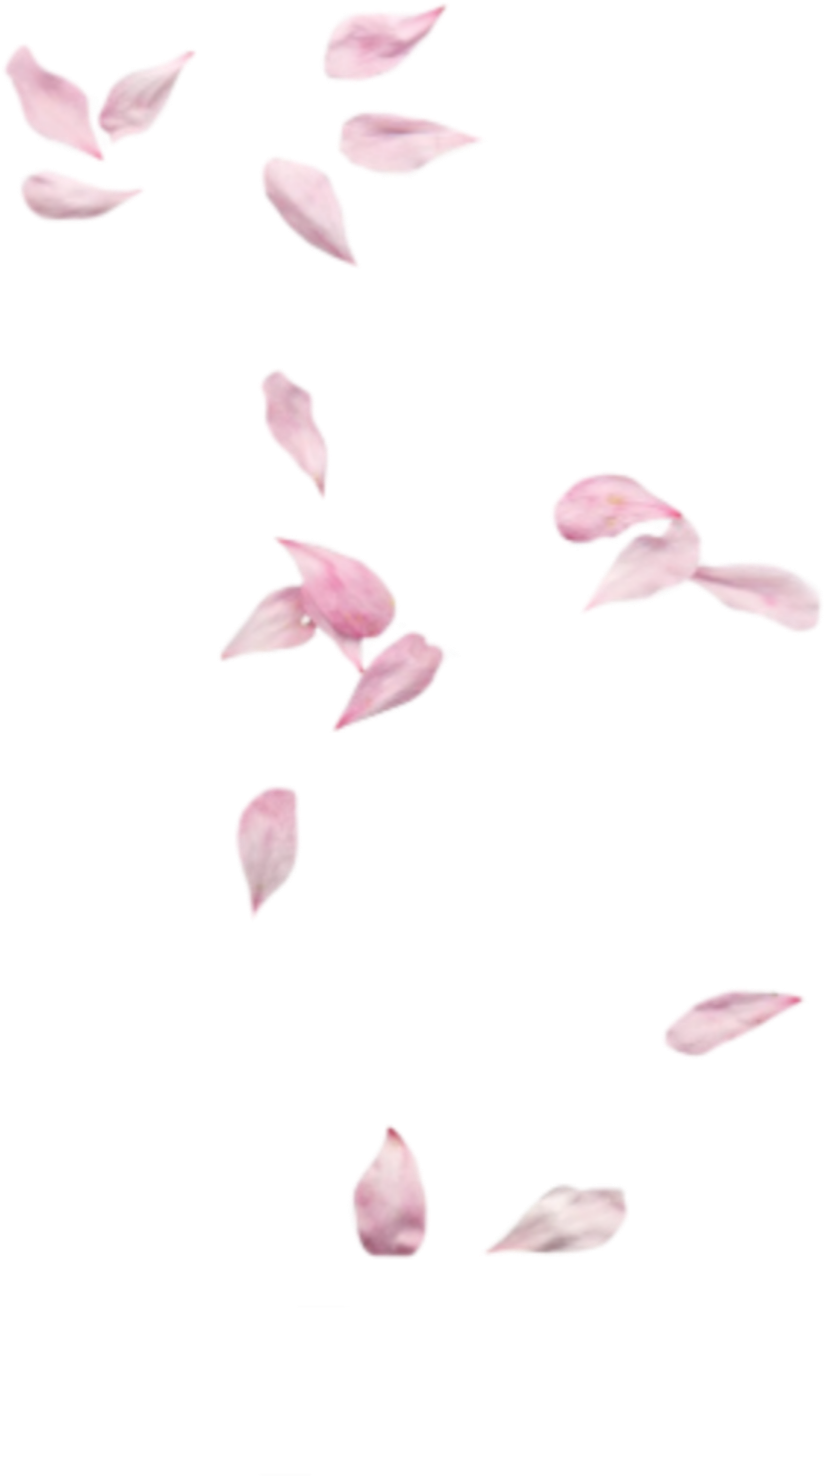 A Pink Petals Falling In The Air